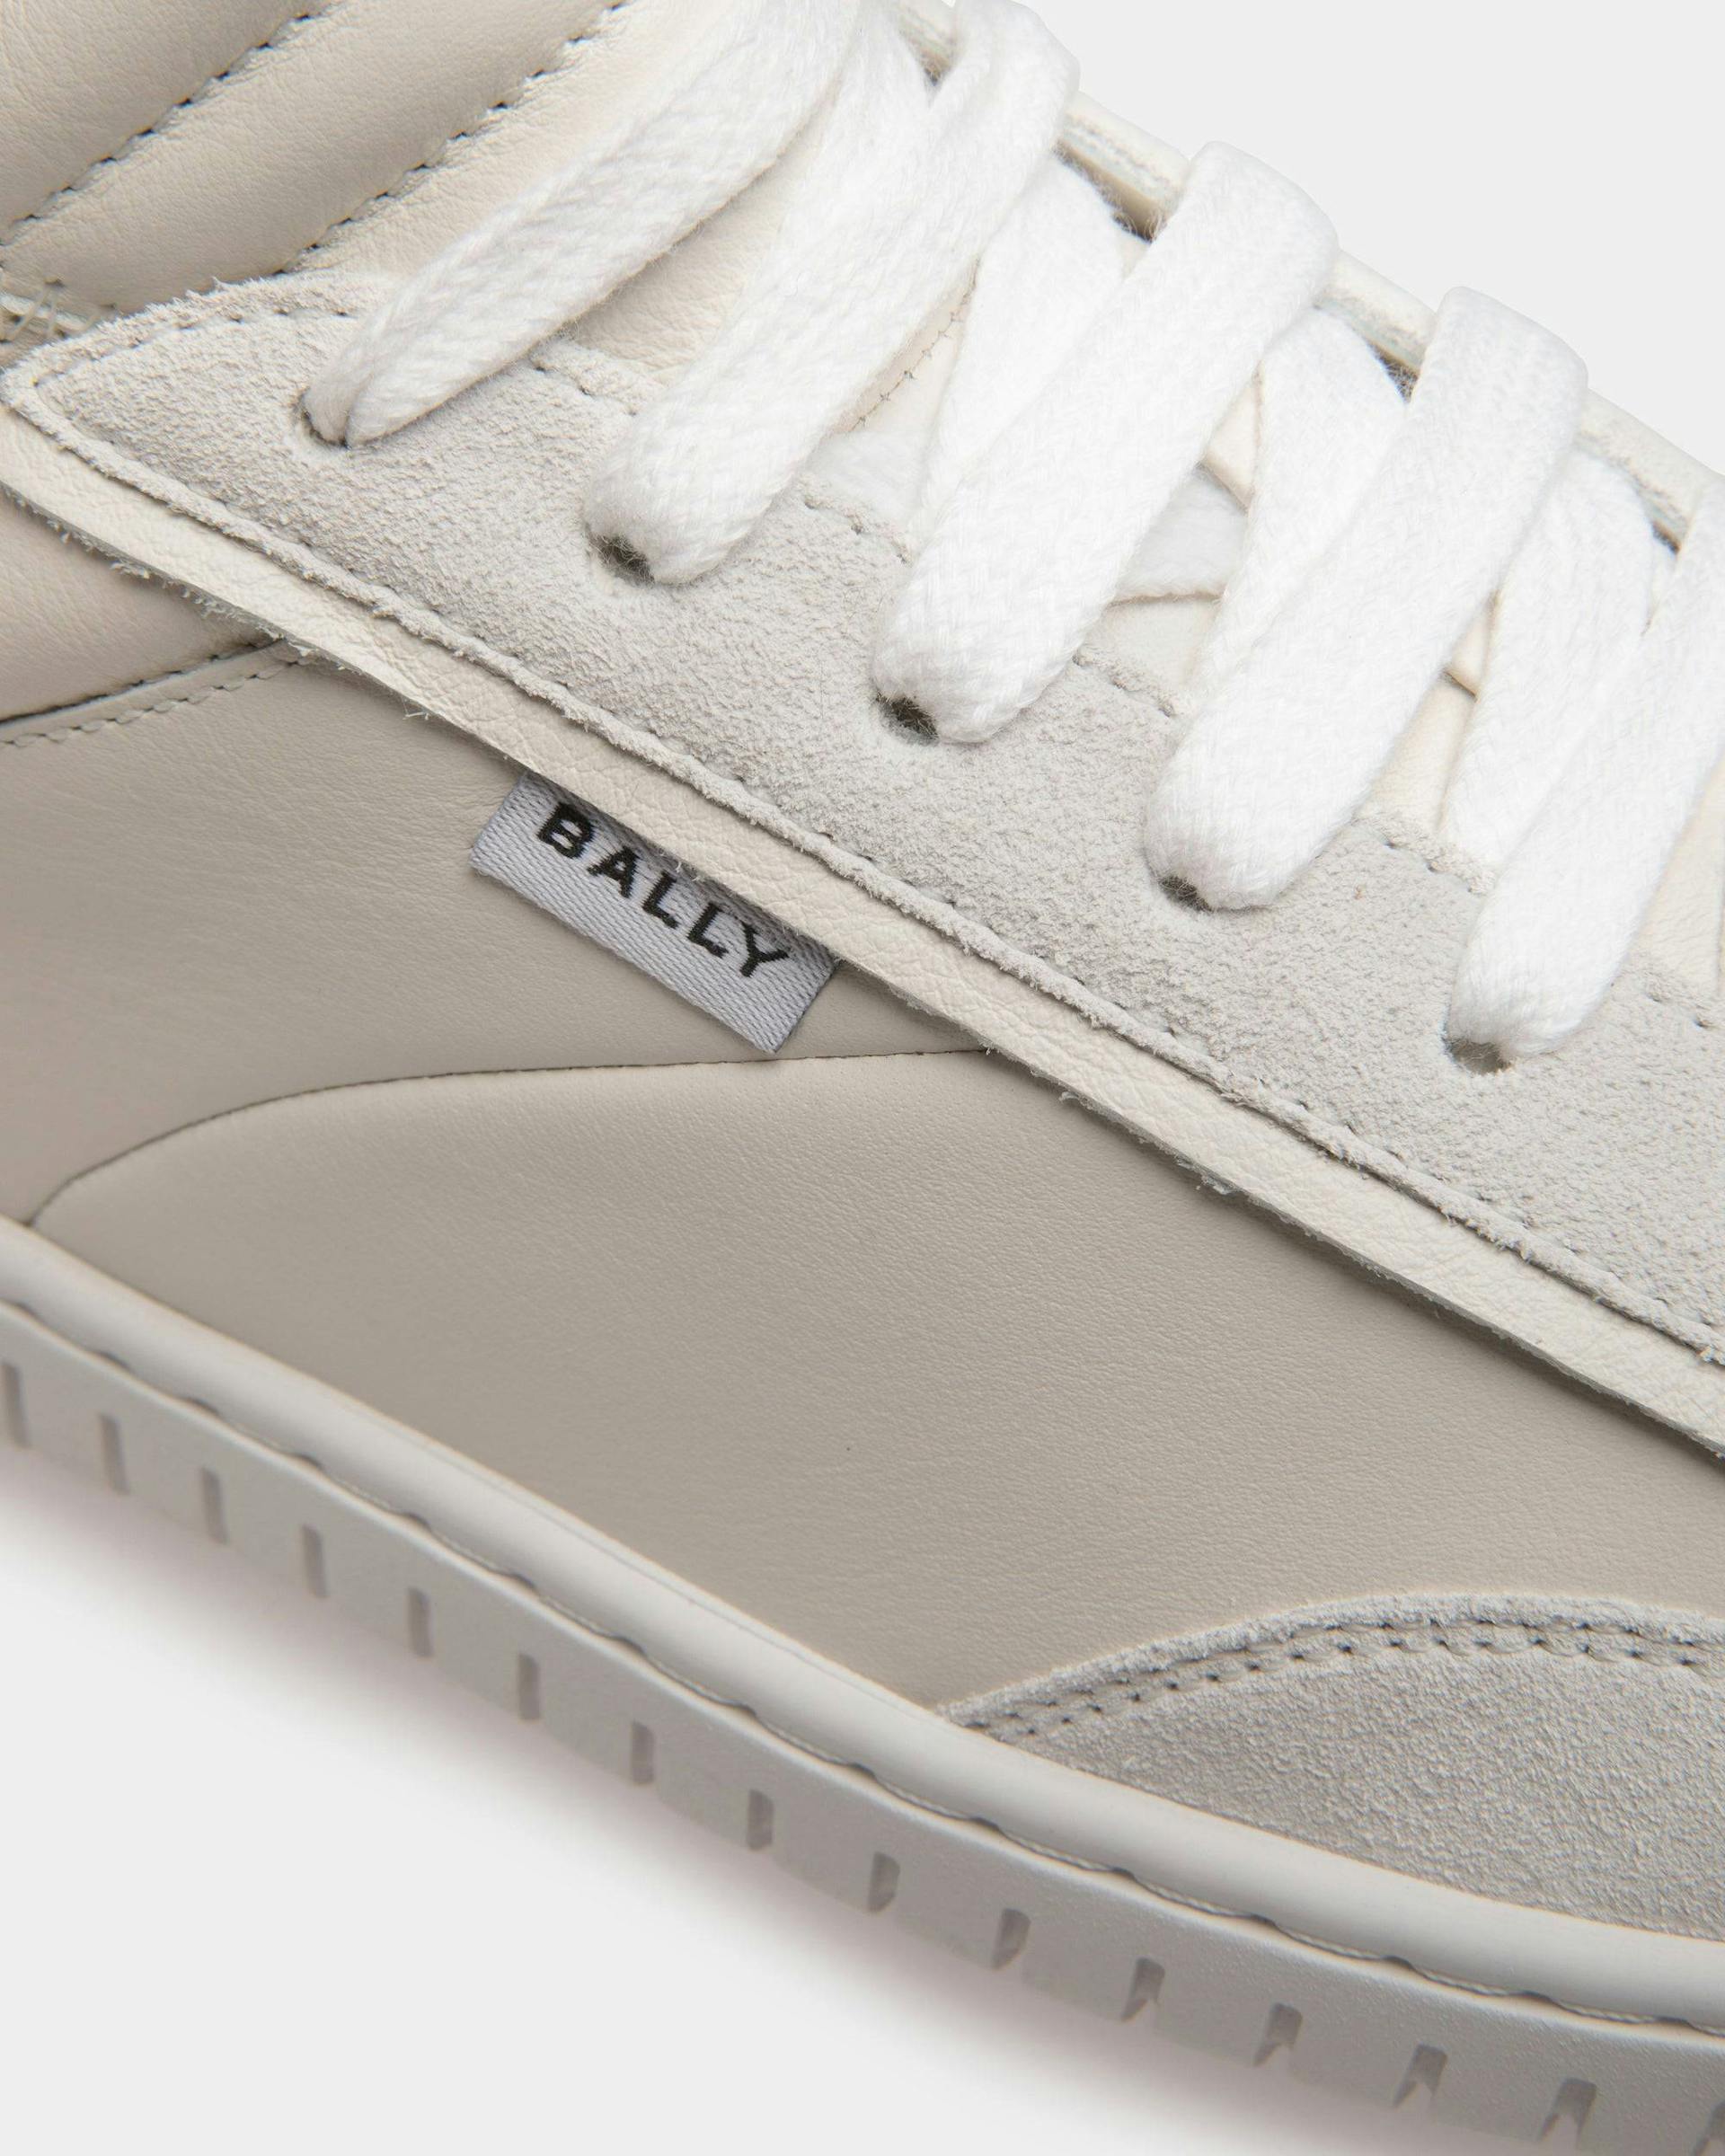 Player Sneakers In White Leather - Women's - Bally - 06